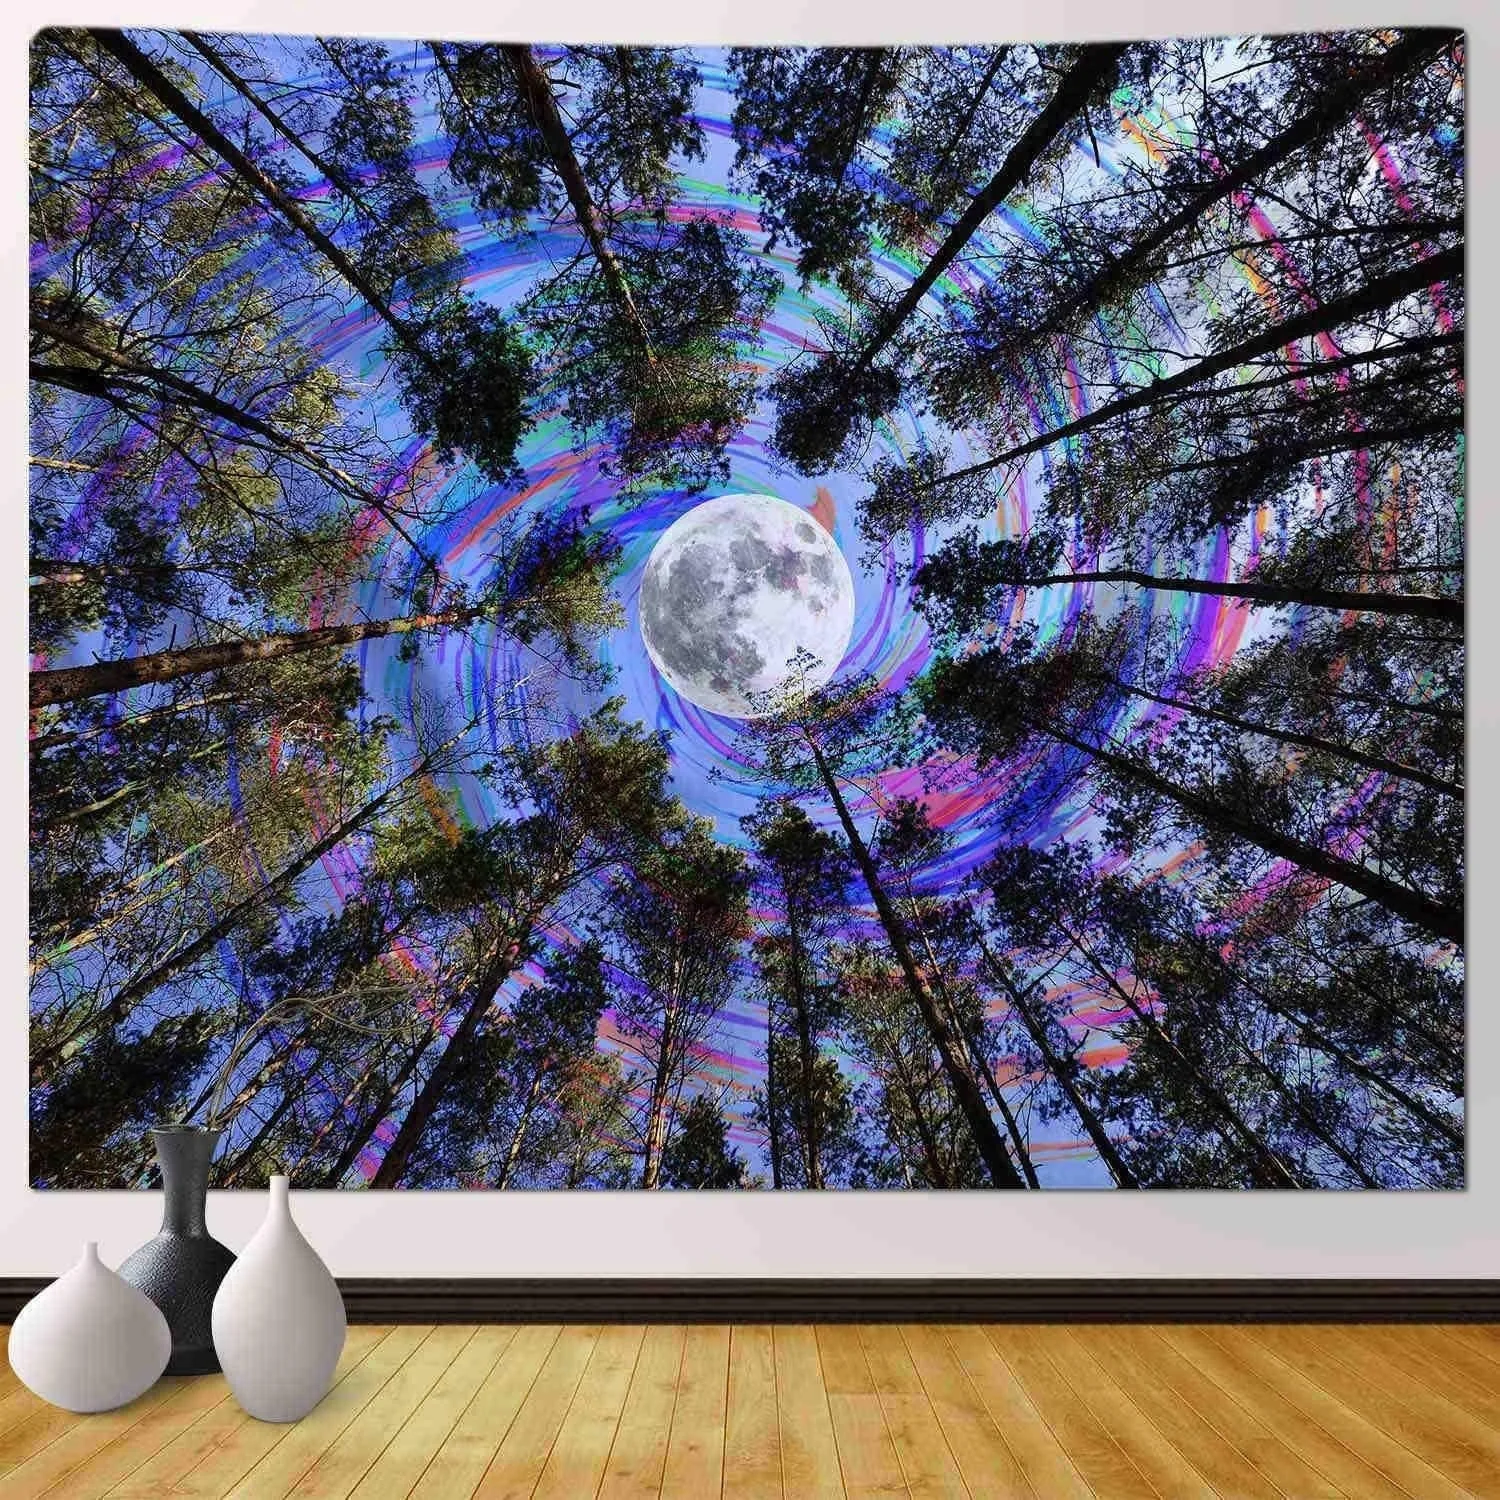 

Funeon Trippy Tapestries Wall Hanging Psychedelic Forest Tree Colorful Moon Purple Ceiling Tapestry for Bedroom Teen Girls Cute